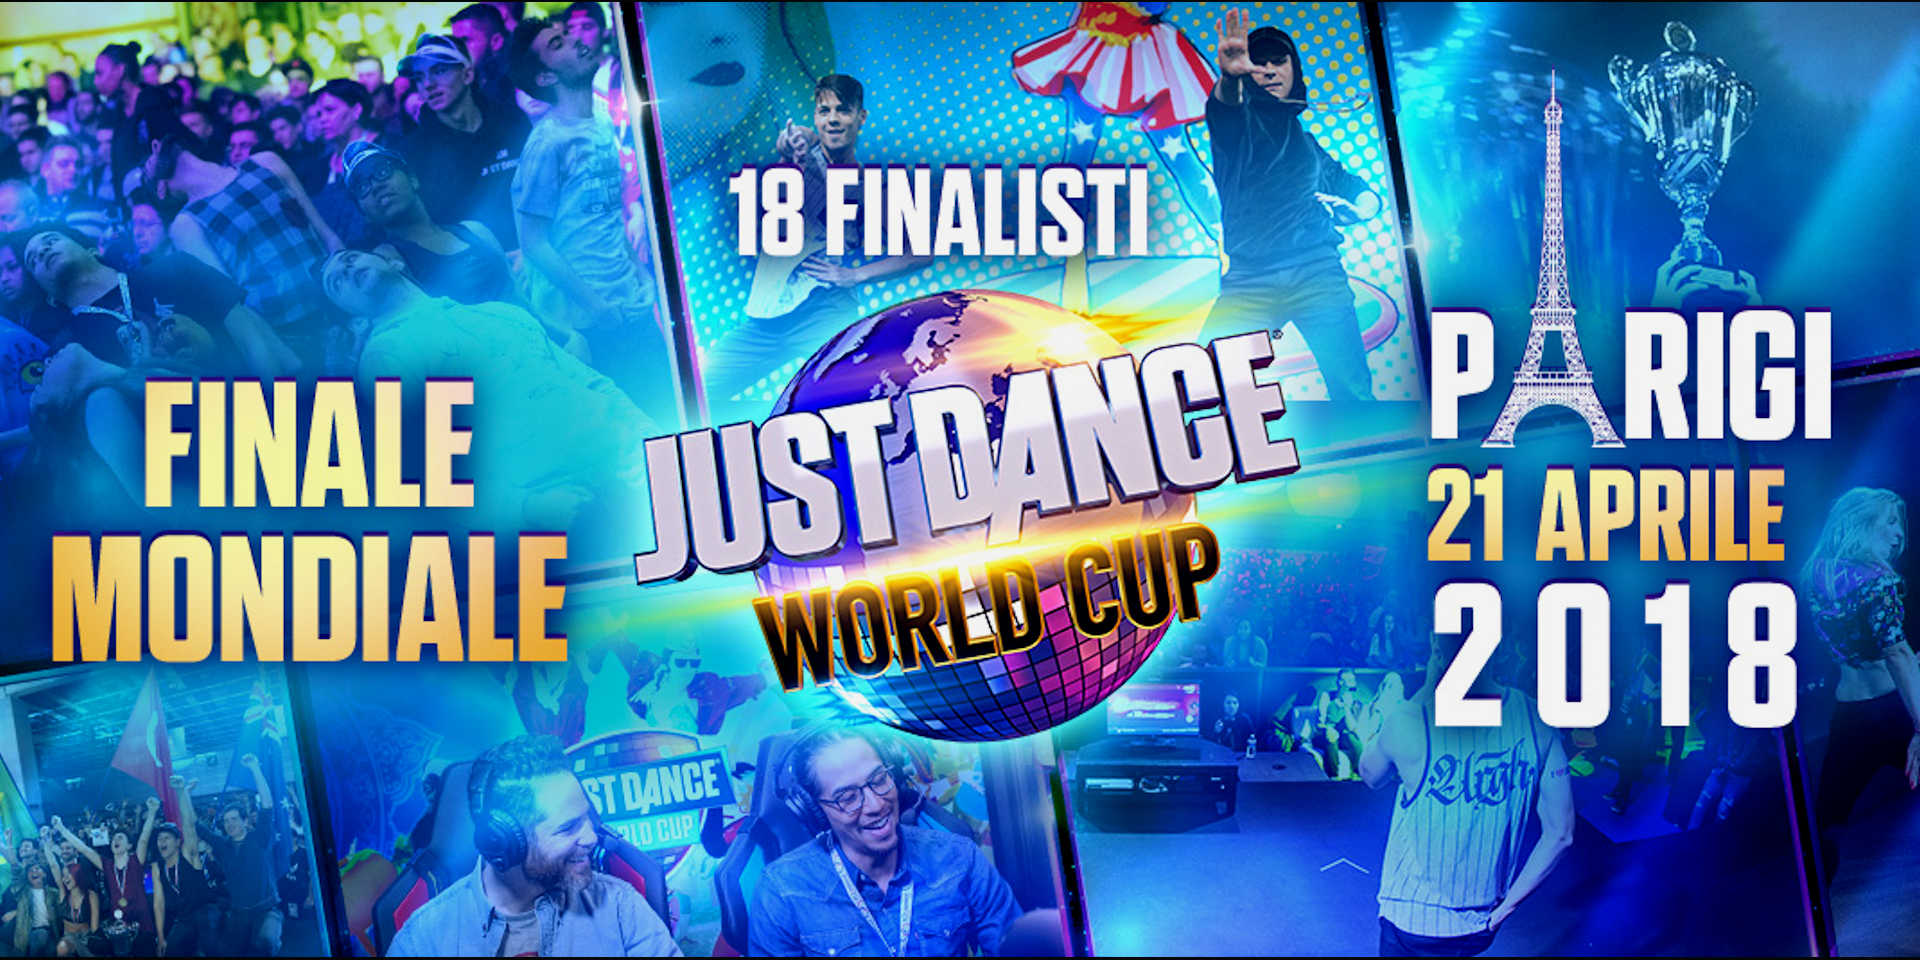 Just Dance World Cup 2018